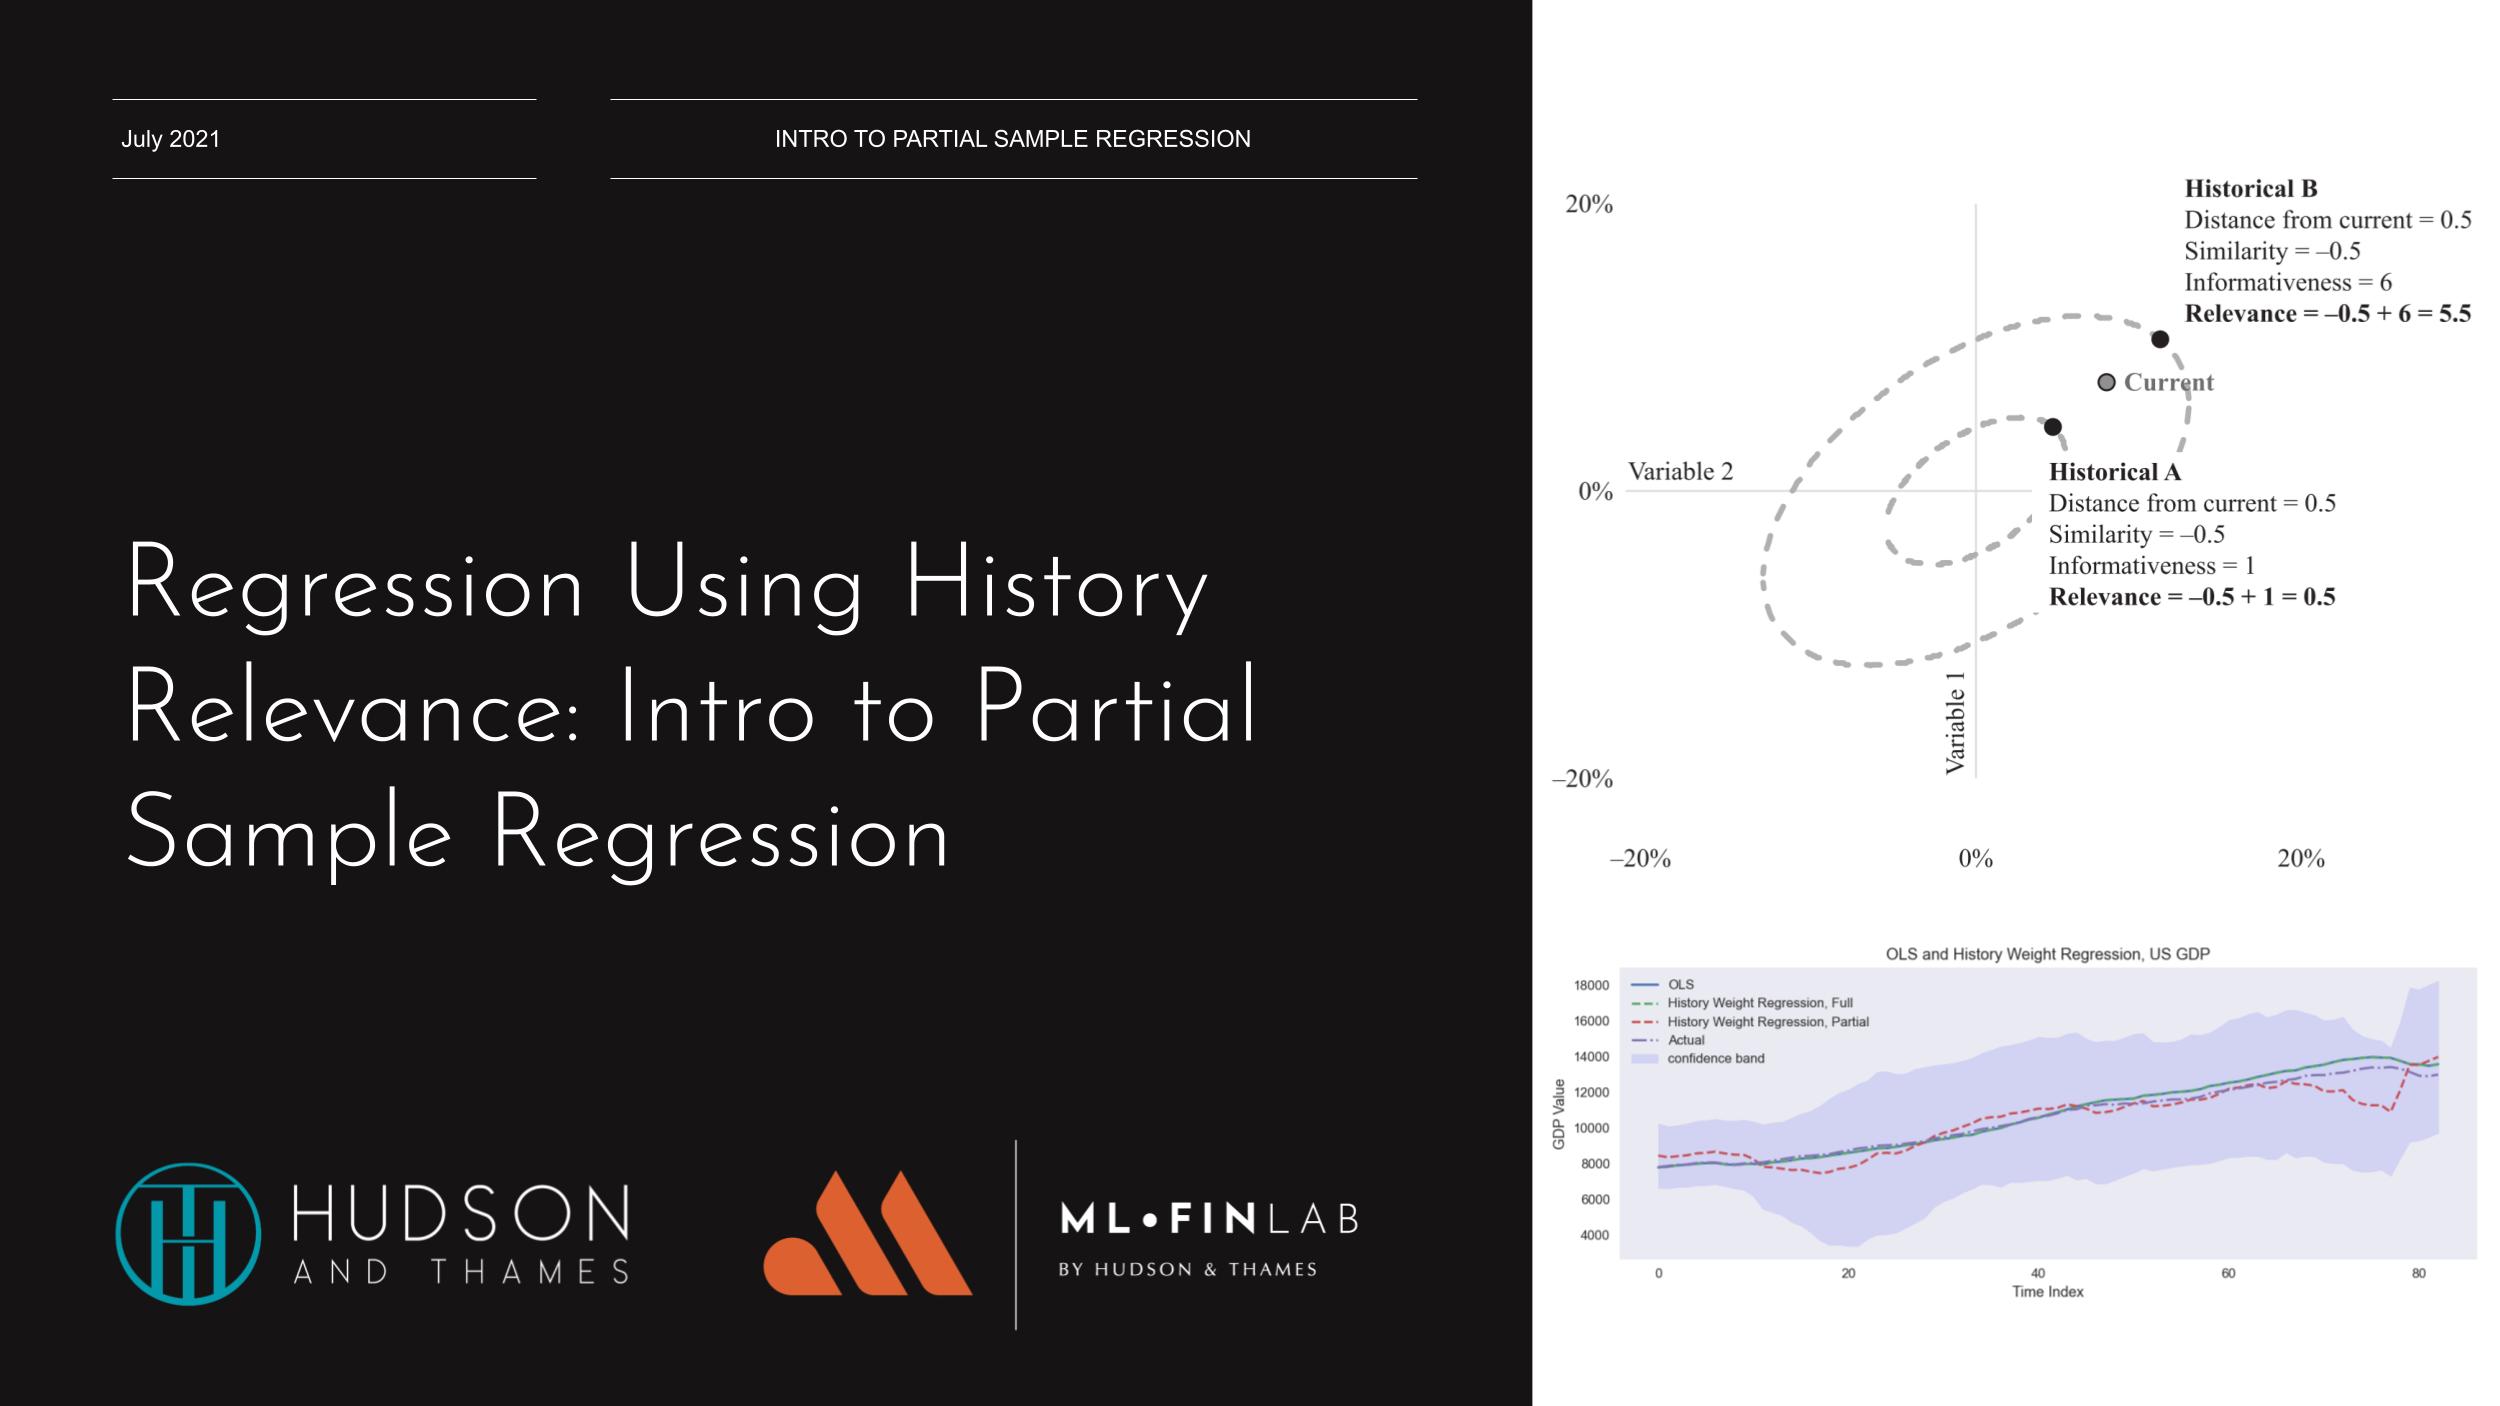 Regression Using Historical Relevance: Intro to Partial Sample Regression